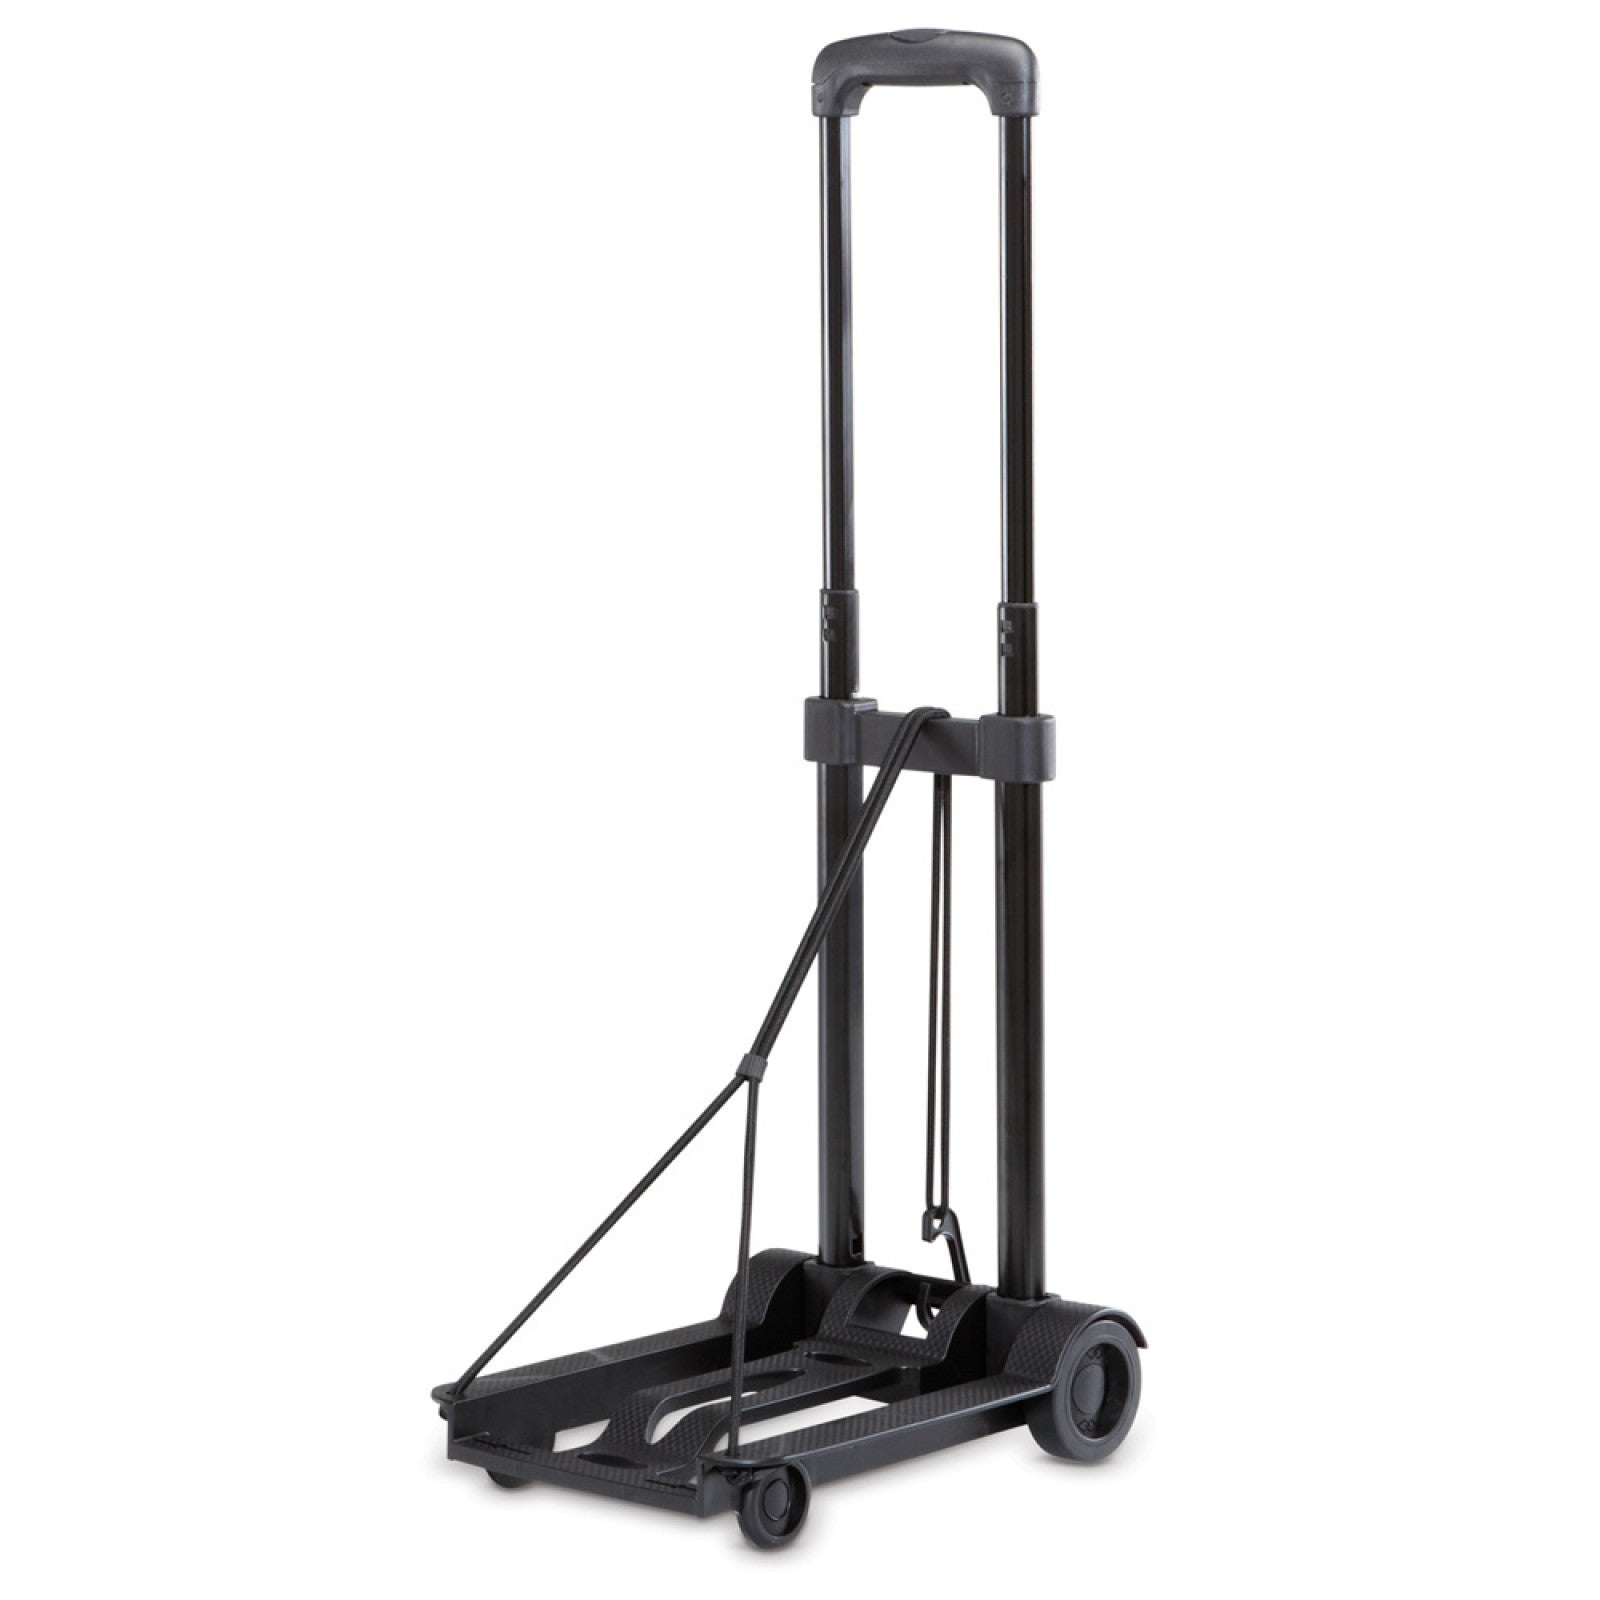 Miami CarryOn Foldable Trolly Dolly Cart - Carry up to 65 Lbs. (Black)